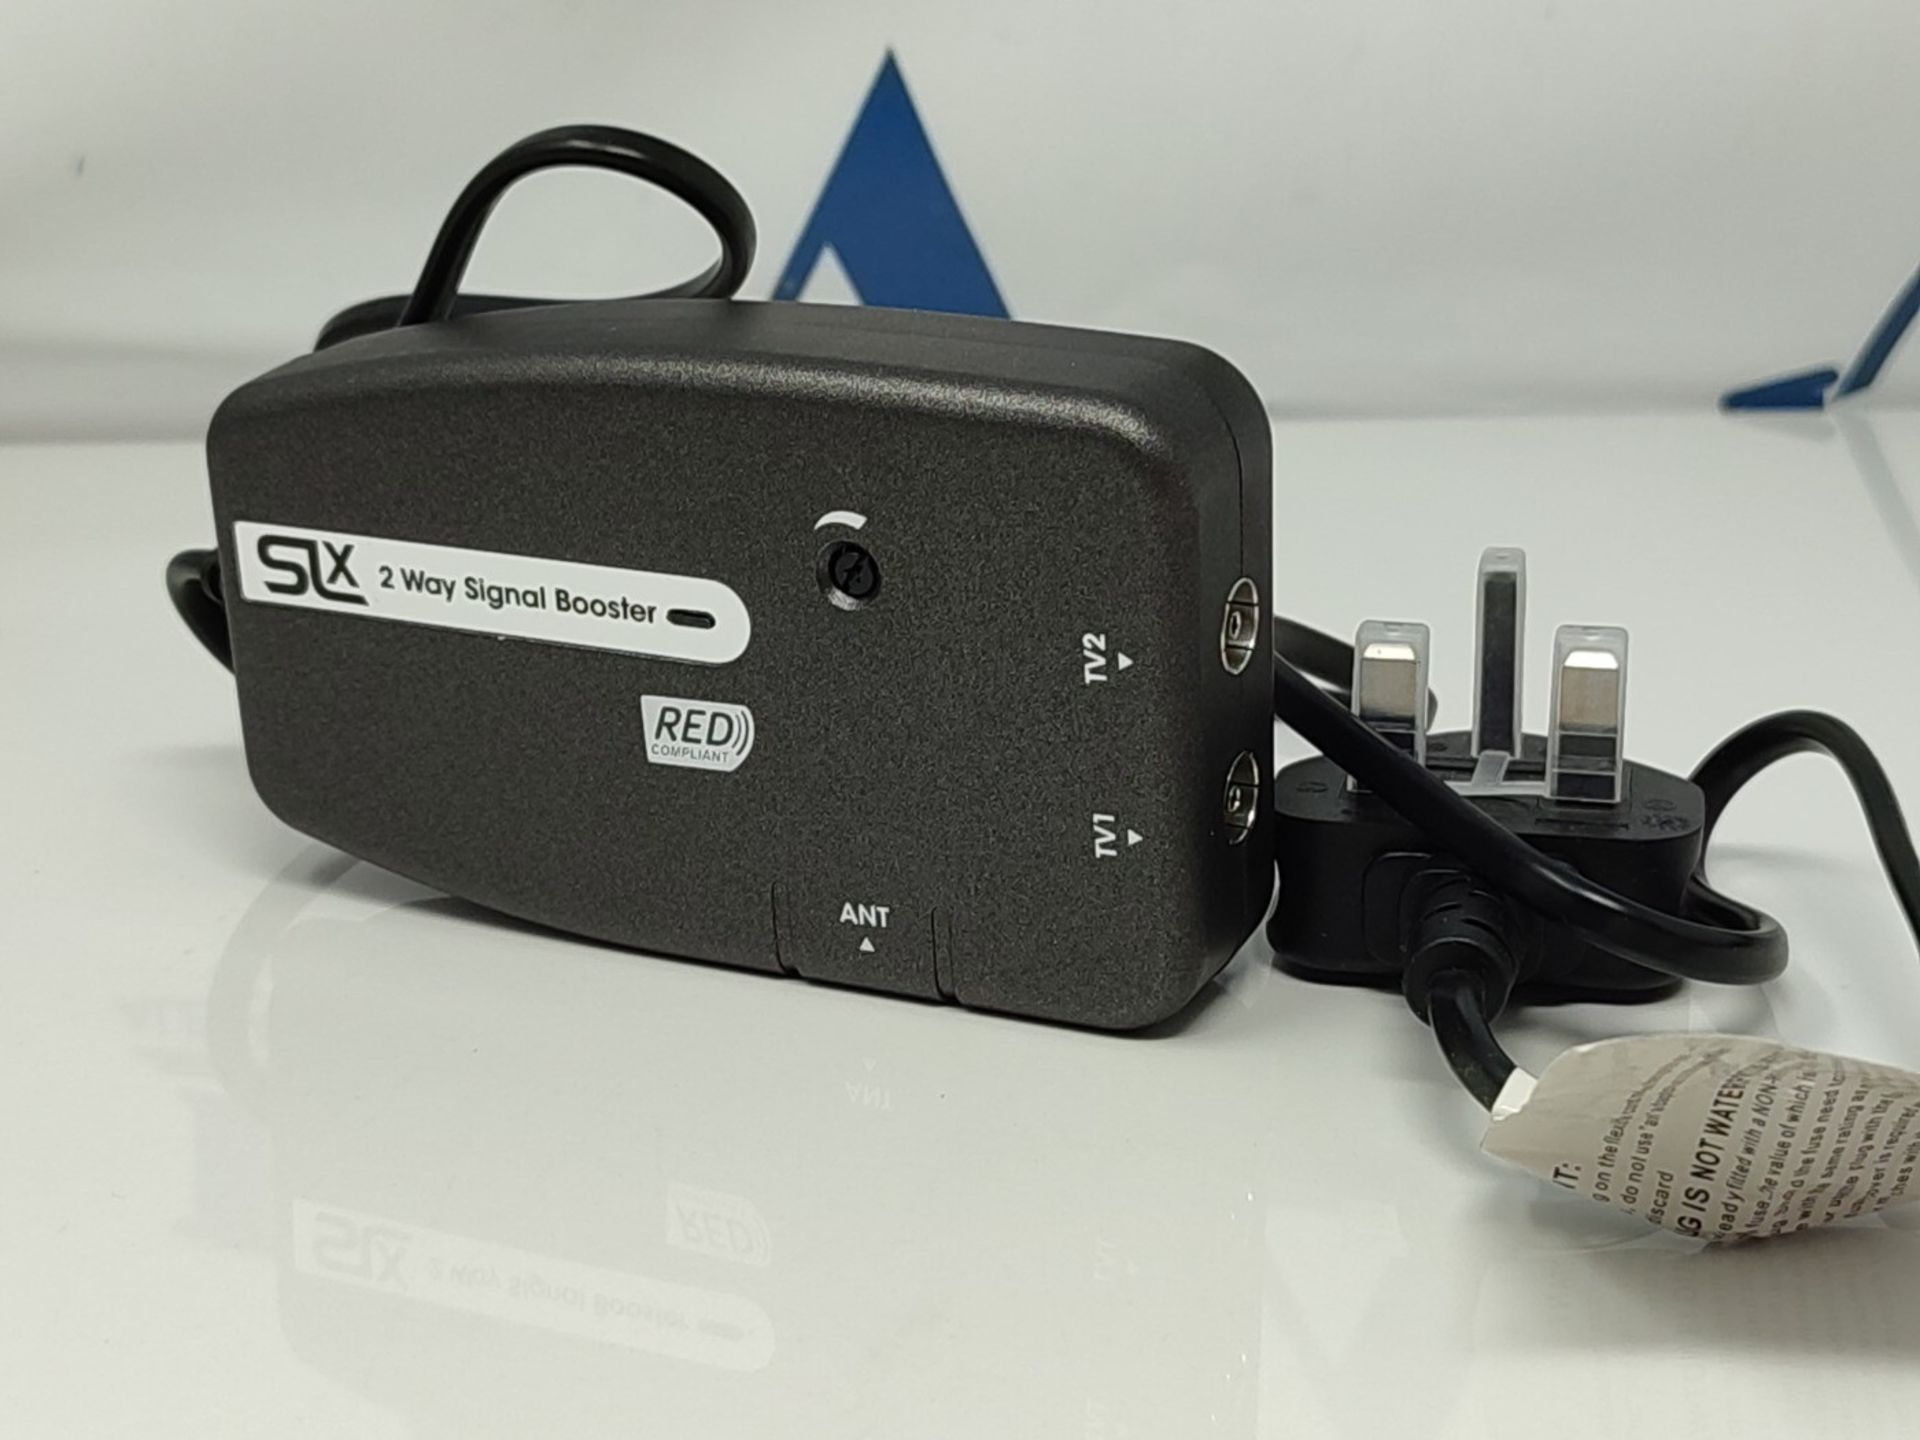 SLx TV Signal Booster Aerial Amplifier, 2 Way Signal Distribution Amplifier with Coax - Image 3 of 3